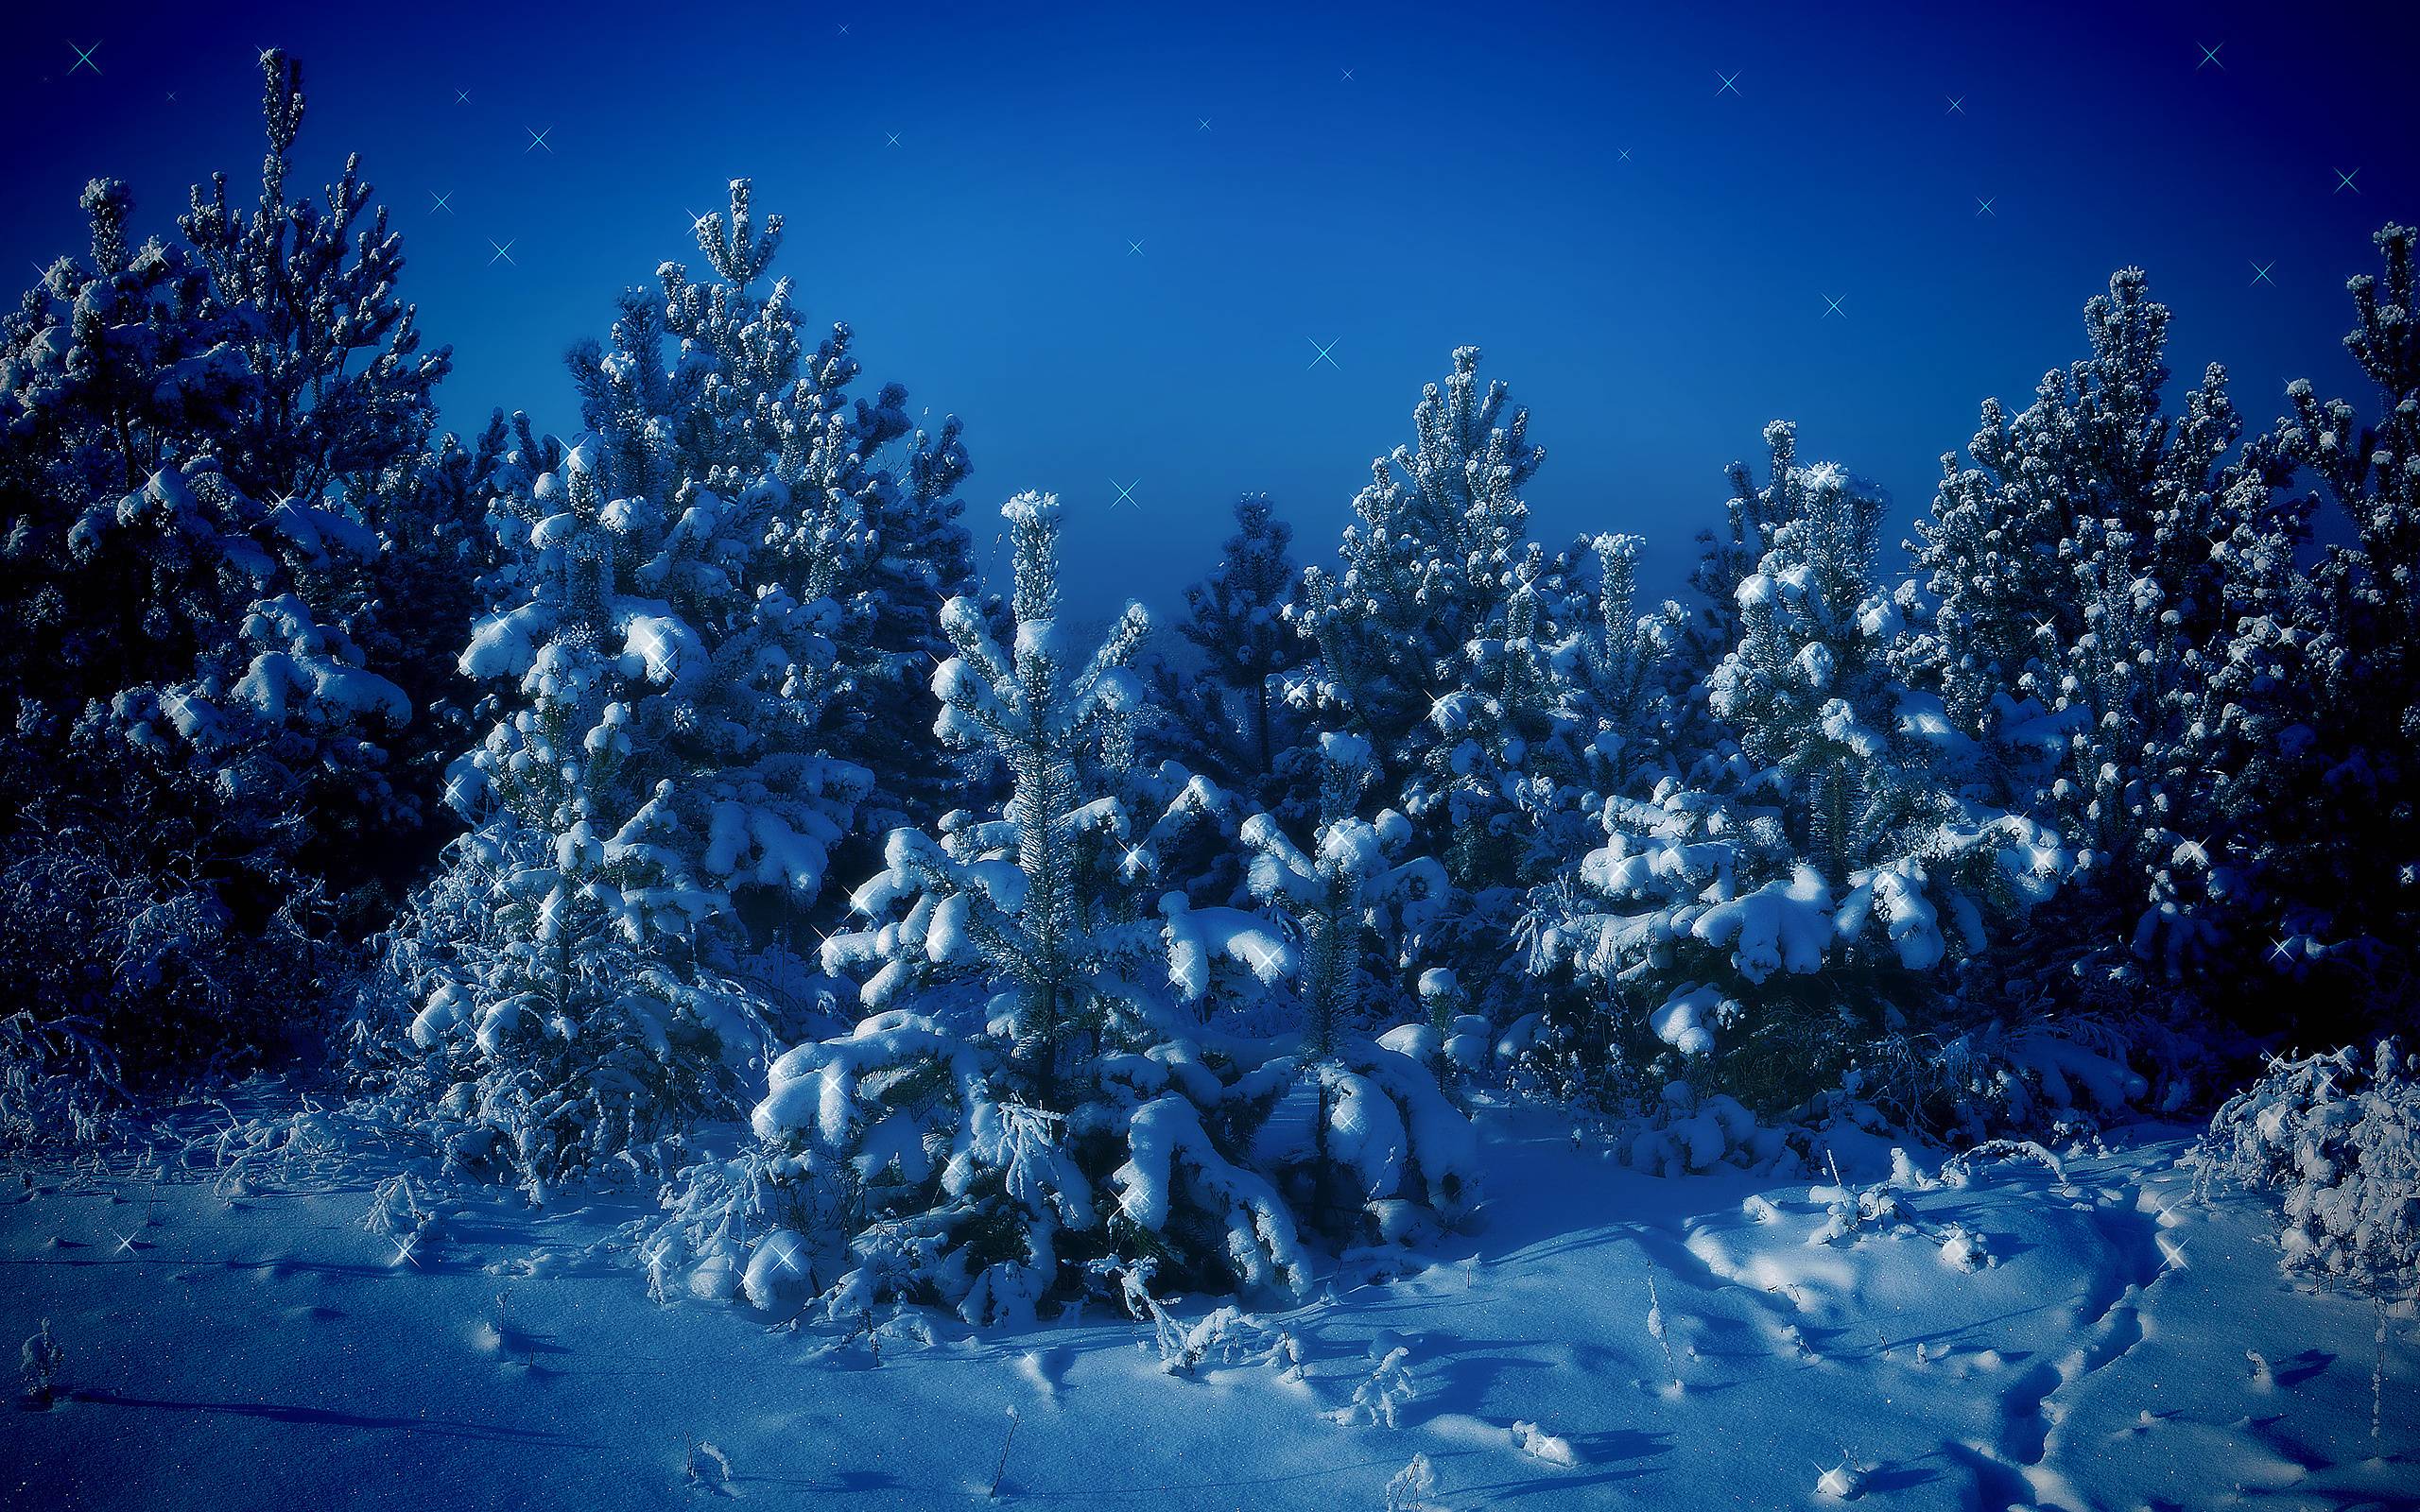 Wallpapers winter trees snow drifts on the desktop